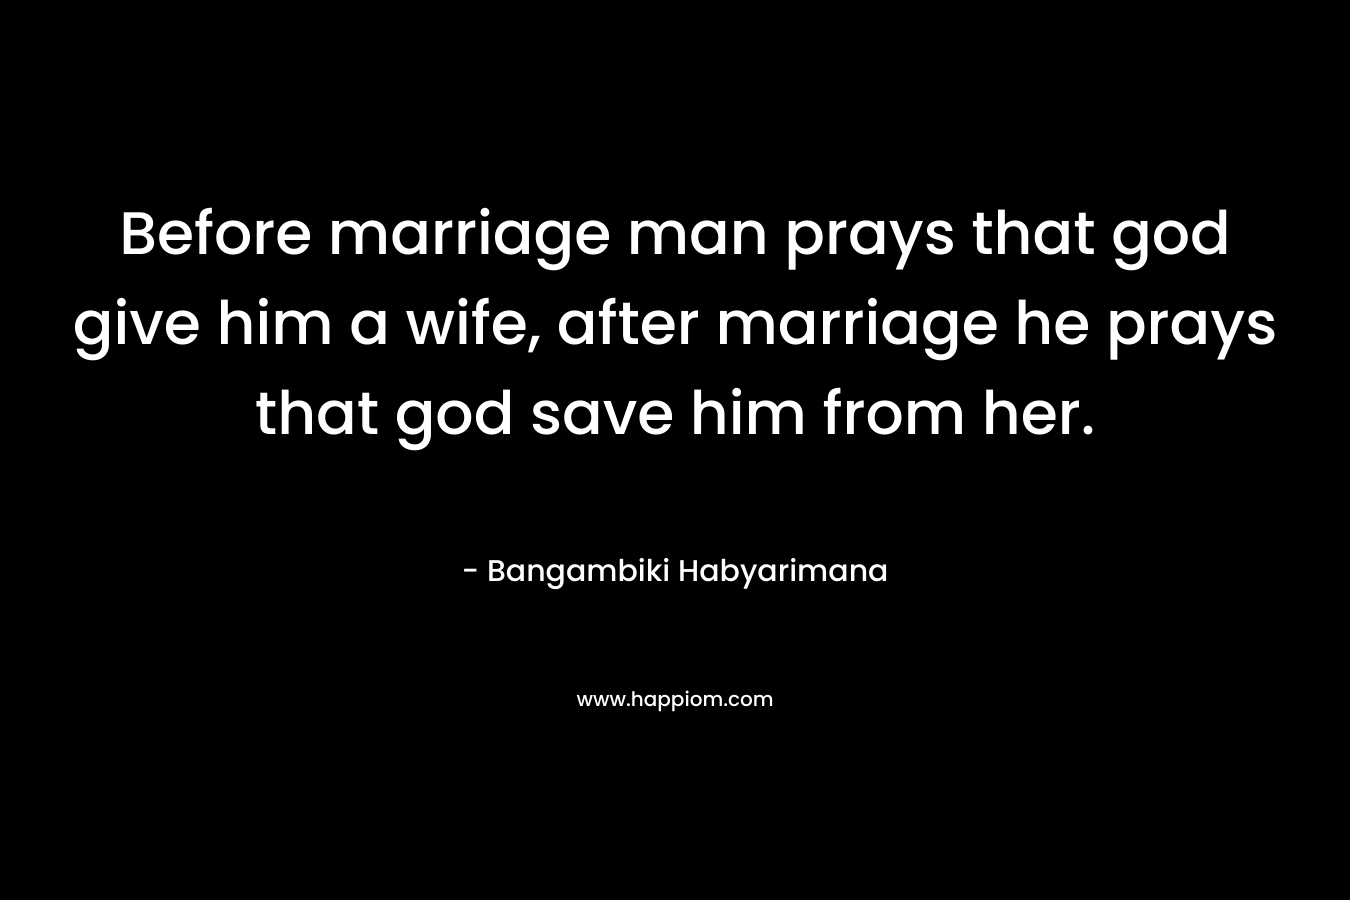 Before marriage man prays that god give him a wife, after marriage he prays that god save him from her.